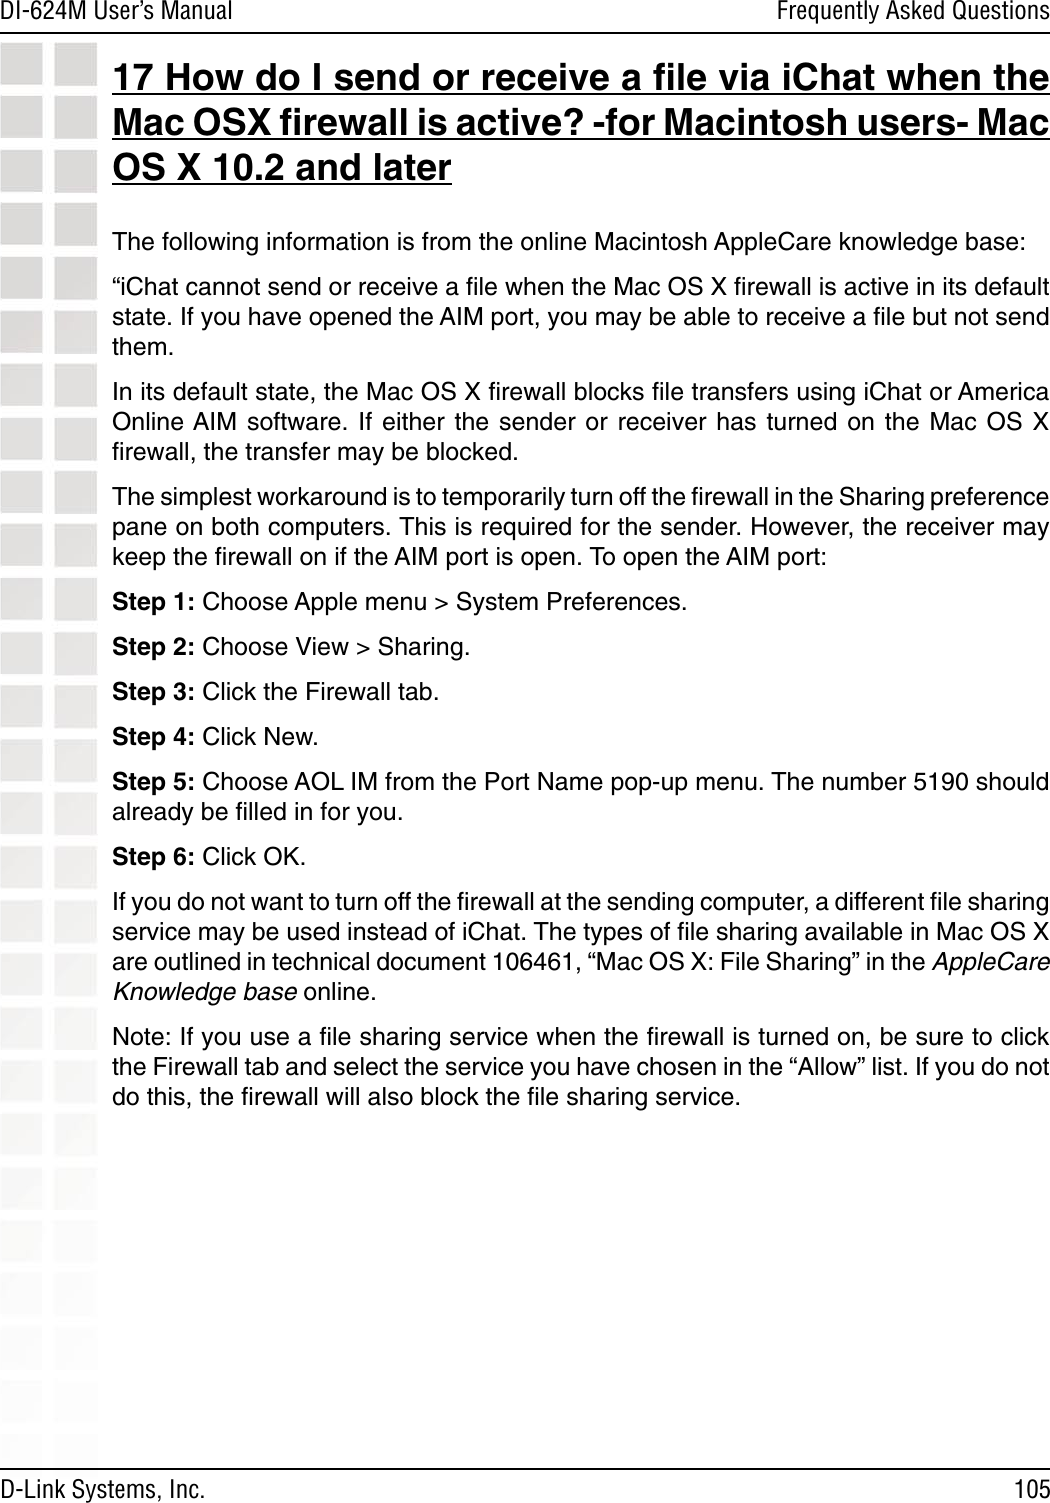 105DI-624M User’s Manual D-Link Systems, Inc.Frequently Asked Questions17 How do I send or receive a ﬁle via iChat when the Mac OSX ﬁrewall is active? -for Macintosh users- Mac OS X 10.2 and laterThe following information is from the online Macintosh AppleCare knowledge base:“iChat cannot send or receive a ﬁle when the Mac OS X ﬁrewall is active in its default state. If you have opened the AIM port, you may be able to receive a ﬁle but not send them. In its default state, the Mac OS X ﬁrewall blocks ﬁle transfers using iChat or America Online AIM software.  If  either  the  sender  or  receiver  has  turned  on  the  Mac  OS  X ﬁrewall, the transfer may be blocked. The simplest workaround is to temporarily turn off the ﬁrewall in the Sharing preference pane on both computers. This is required for the sender. However, the receiver may keep the ﬁrewall on if the AIM port is open. To open the AIM port:Step 1: Choose Apple menu &gt; System Preferences.Step 2: Choose View &gt; Sharing.Step 3: Click the Firewall tab.Step 4: Click New.Step 5: Choose AOL IM from the Port Name pop-up menu. The number 5190 should already be ﬁlled in for you.Step 6: Click OK.If you do not want to turn off the ﬁrewall at the sending computer, a different ﬁle sharing service may be used instead of iChat. The types of ﬁle sharing available in Mac OS X are outlined in technical document 106461, “Mac OS X: File Sharing” in the AppleCare Knowledge base online.Note: If you use a ﬁle sharing service when the ﬁrewall is turned on, be sure to click the Firewall tab and select the service you have chosen in the “Allow” list. If you do not do this, the ﬁrewall will also block the ﬁle sharing service.